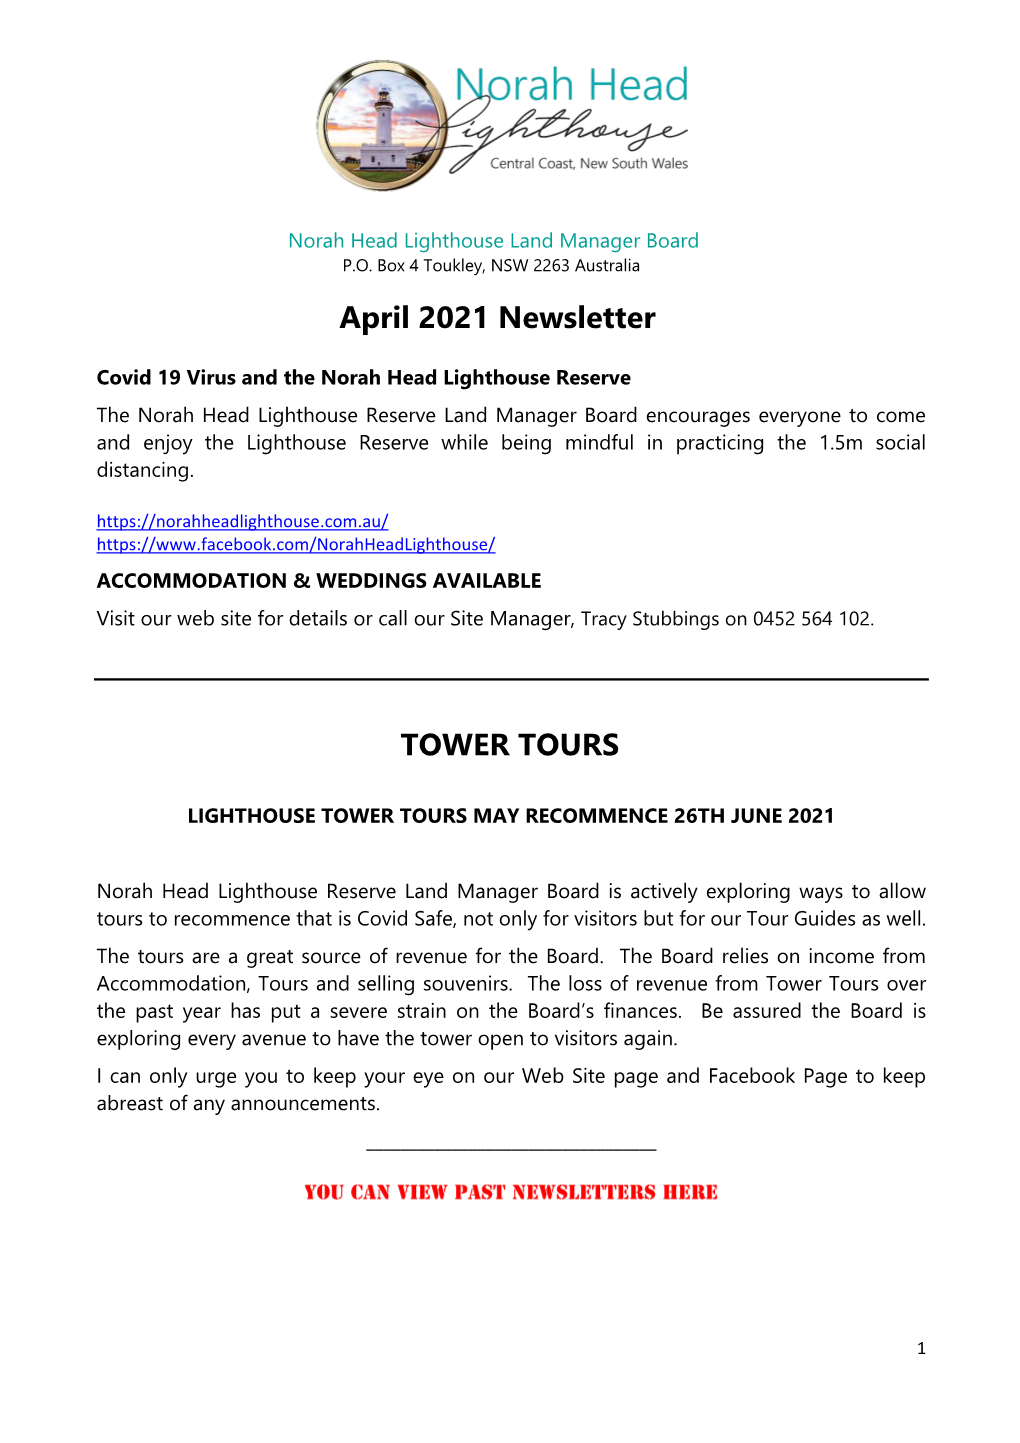 April 2021 Newsletter TOWER TOURS